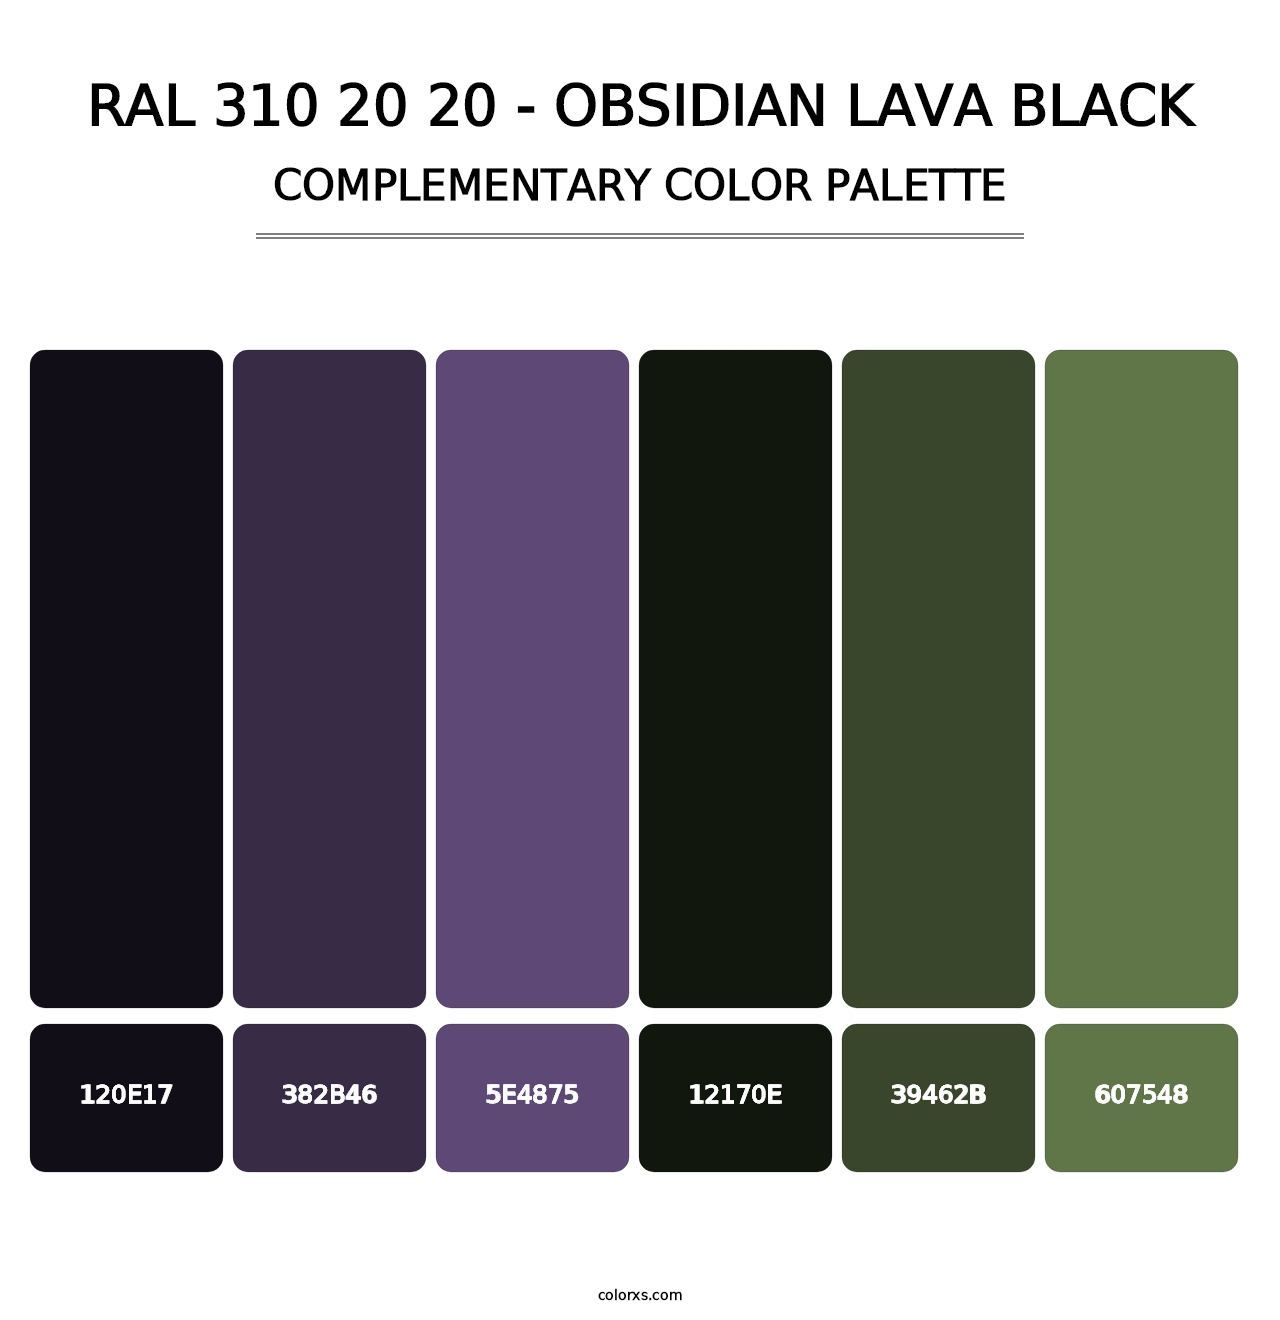 RAL 310 20 20 - Obsidian Lava Black - Complementary Color Palette